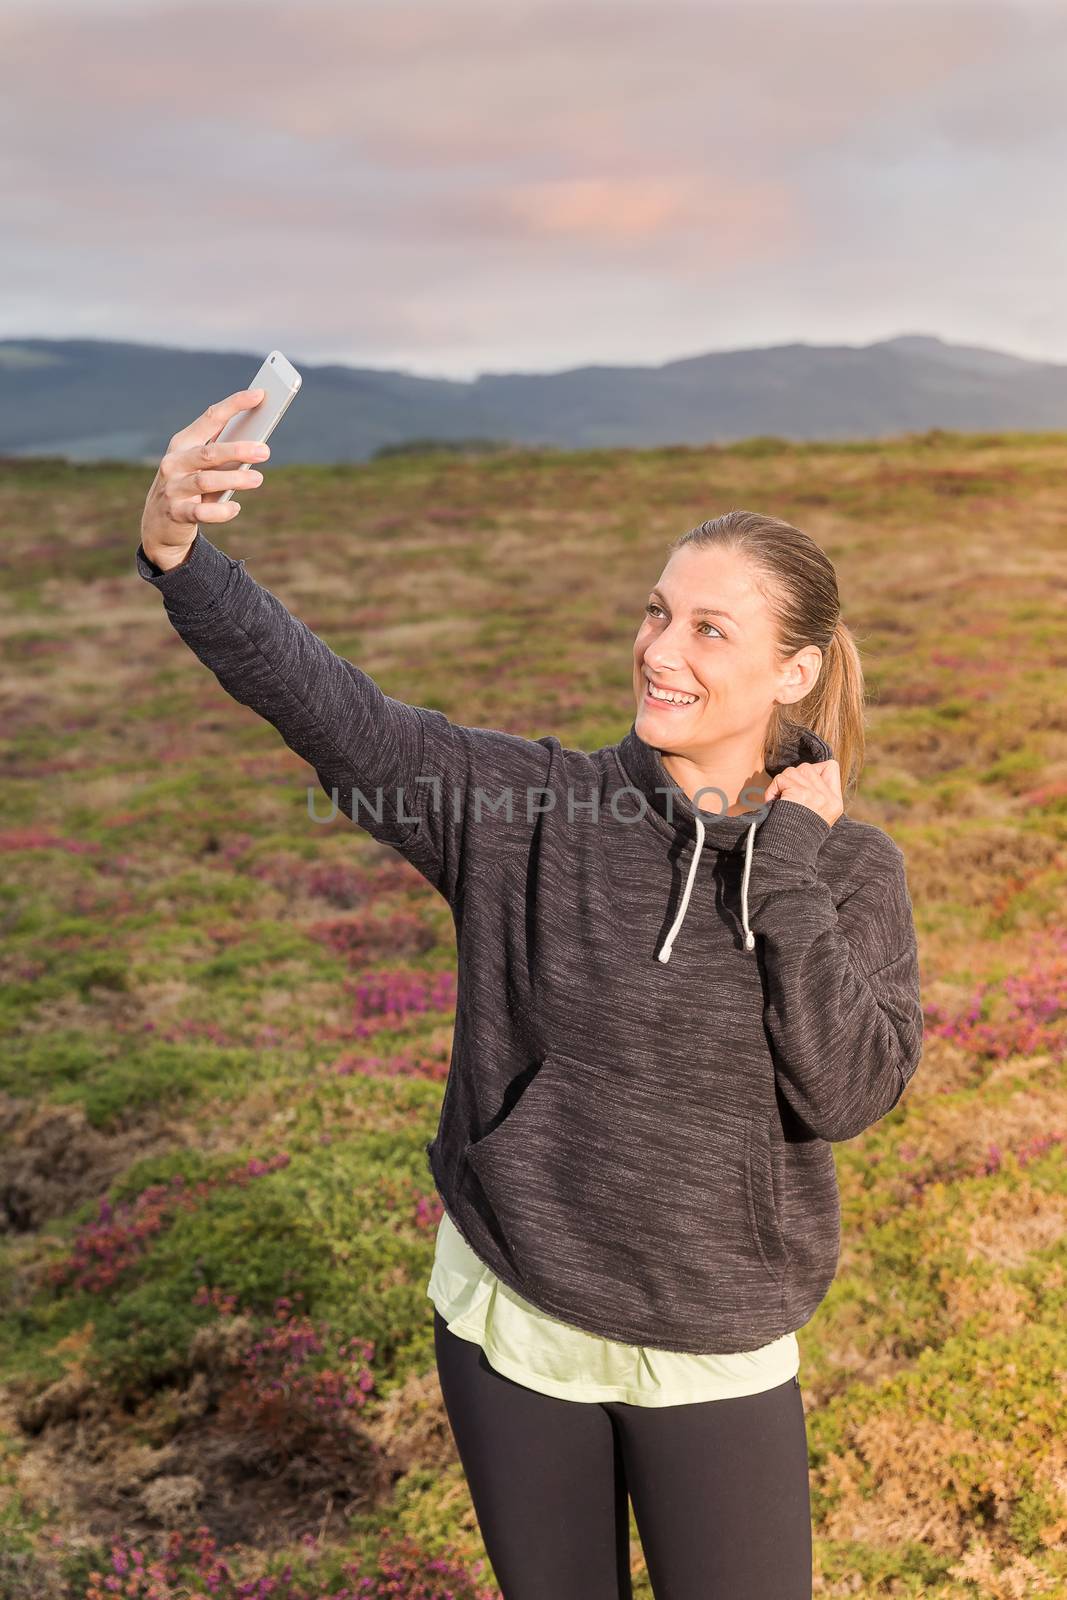 Girl in sportswear taking a self-portrait with a mobile phone in the park at sunset